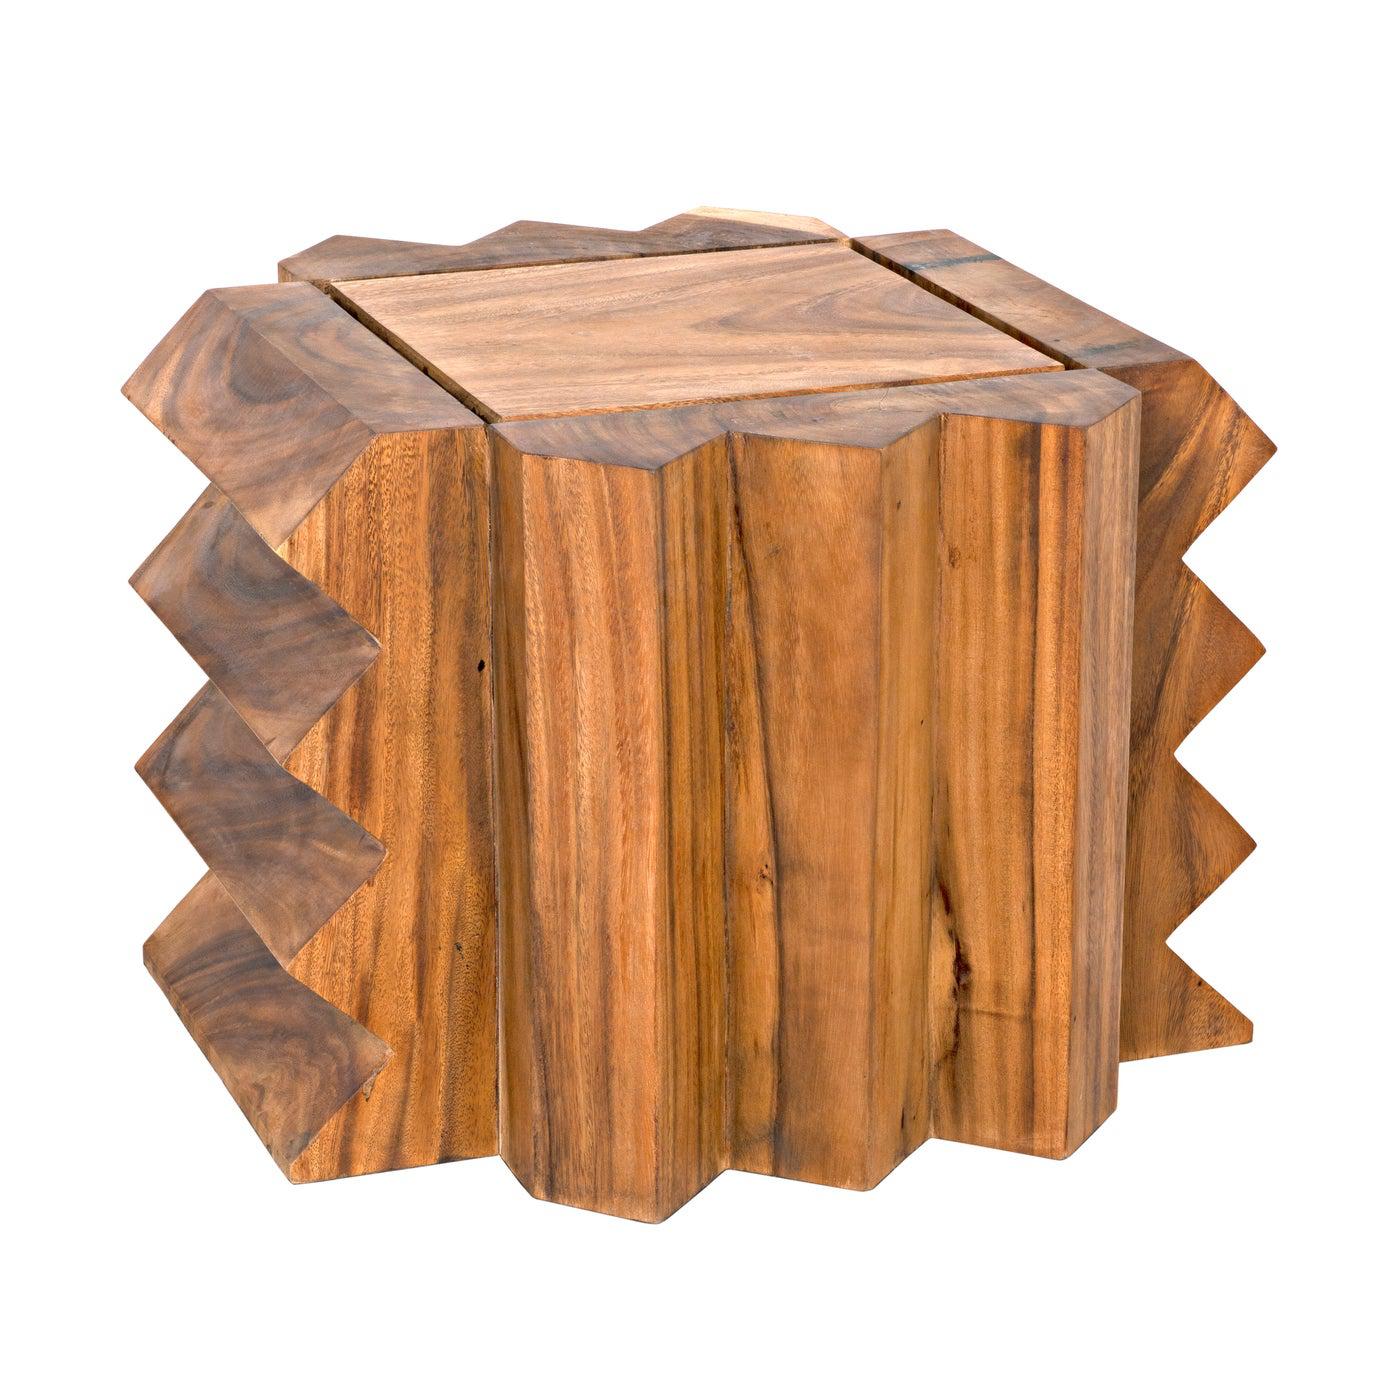 Watson Accent Low Table/Stool, Munggur Wood